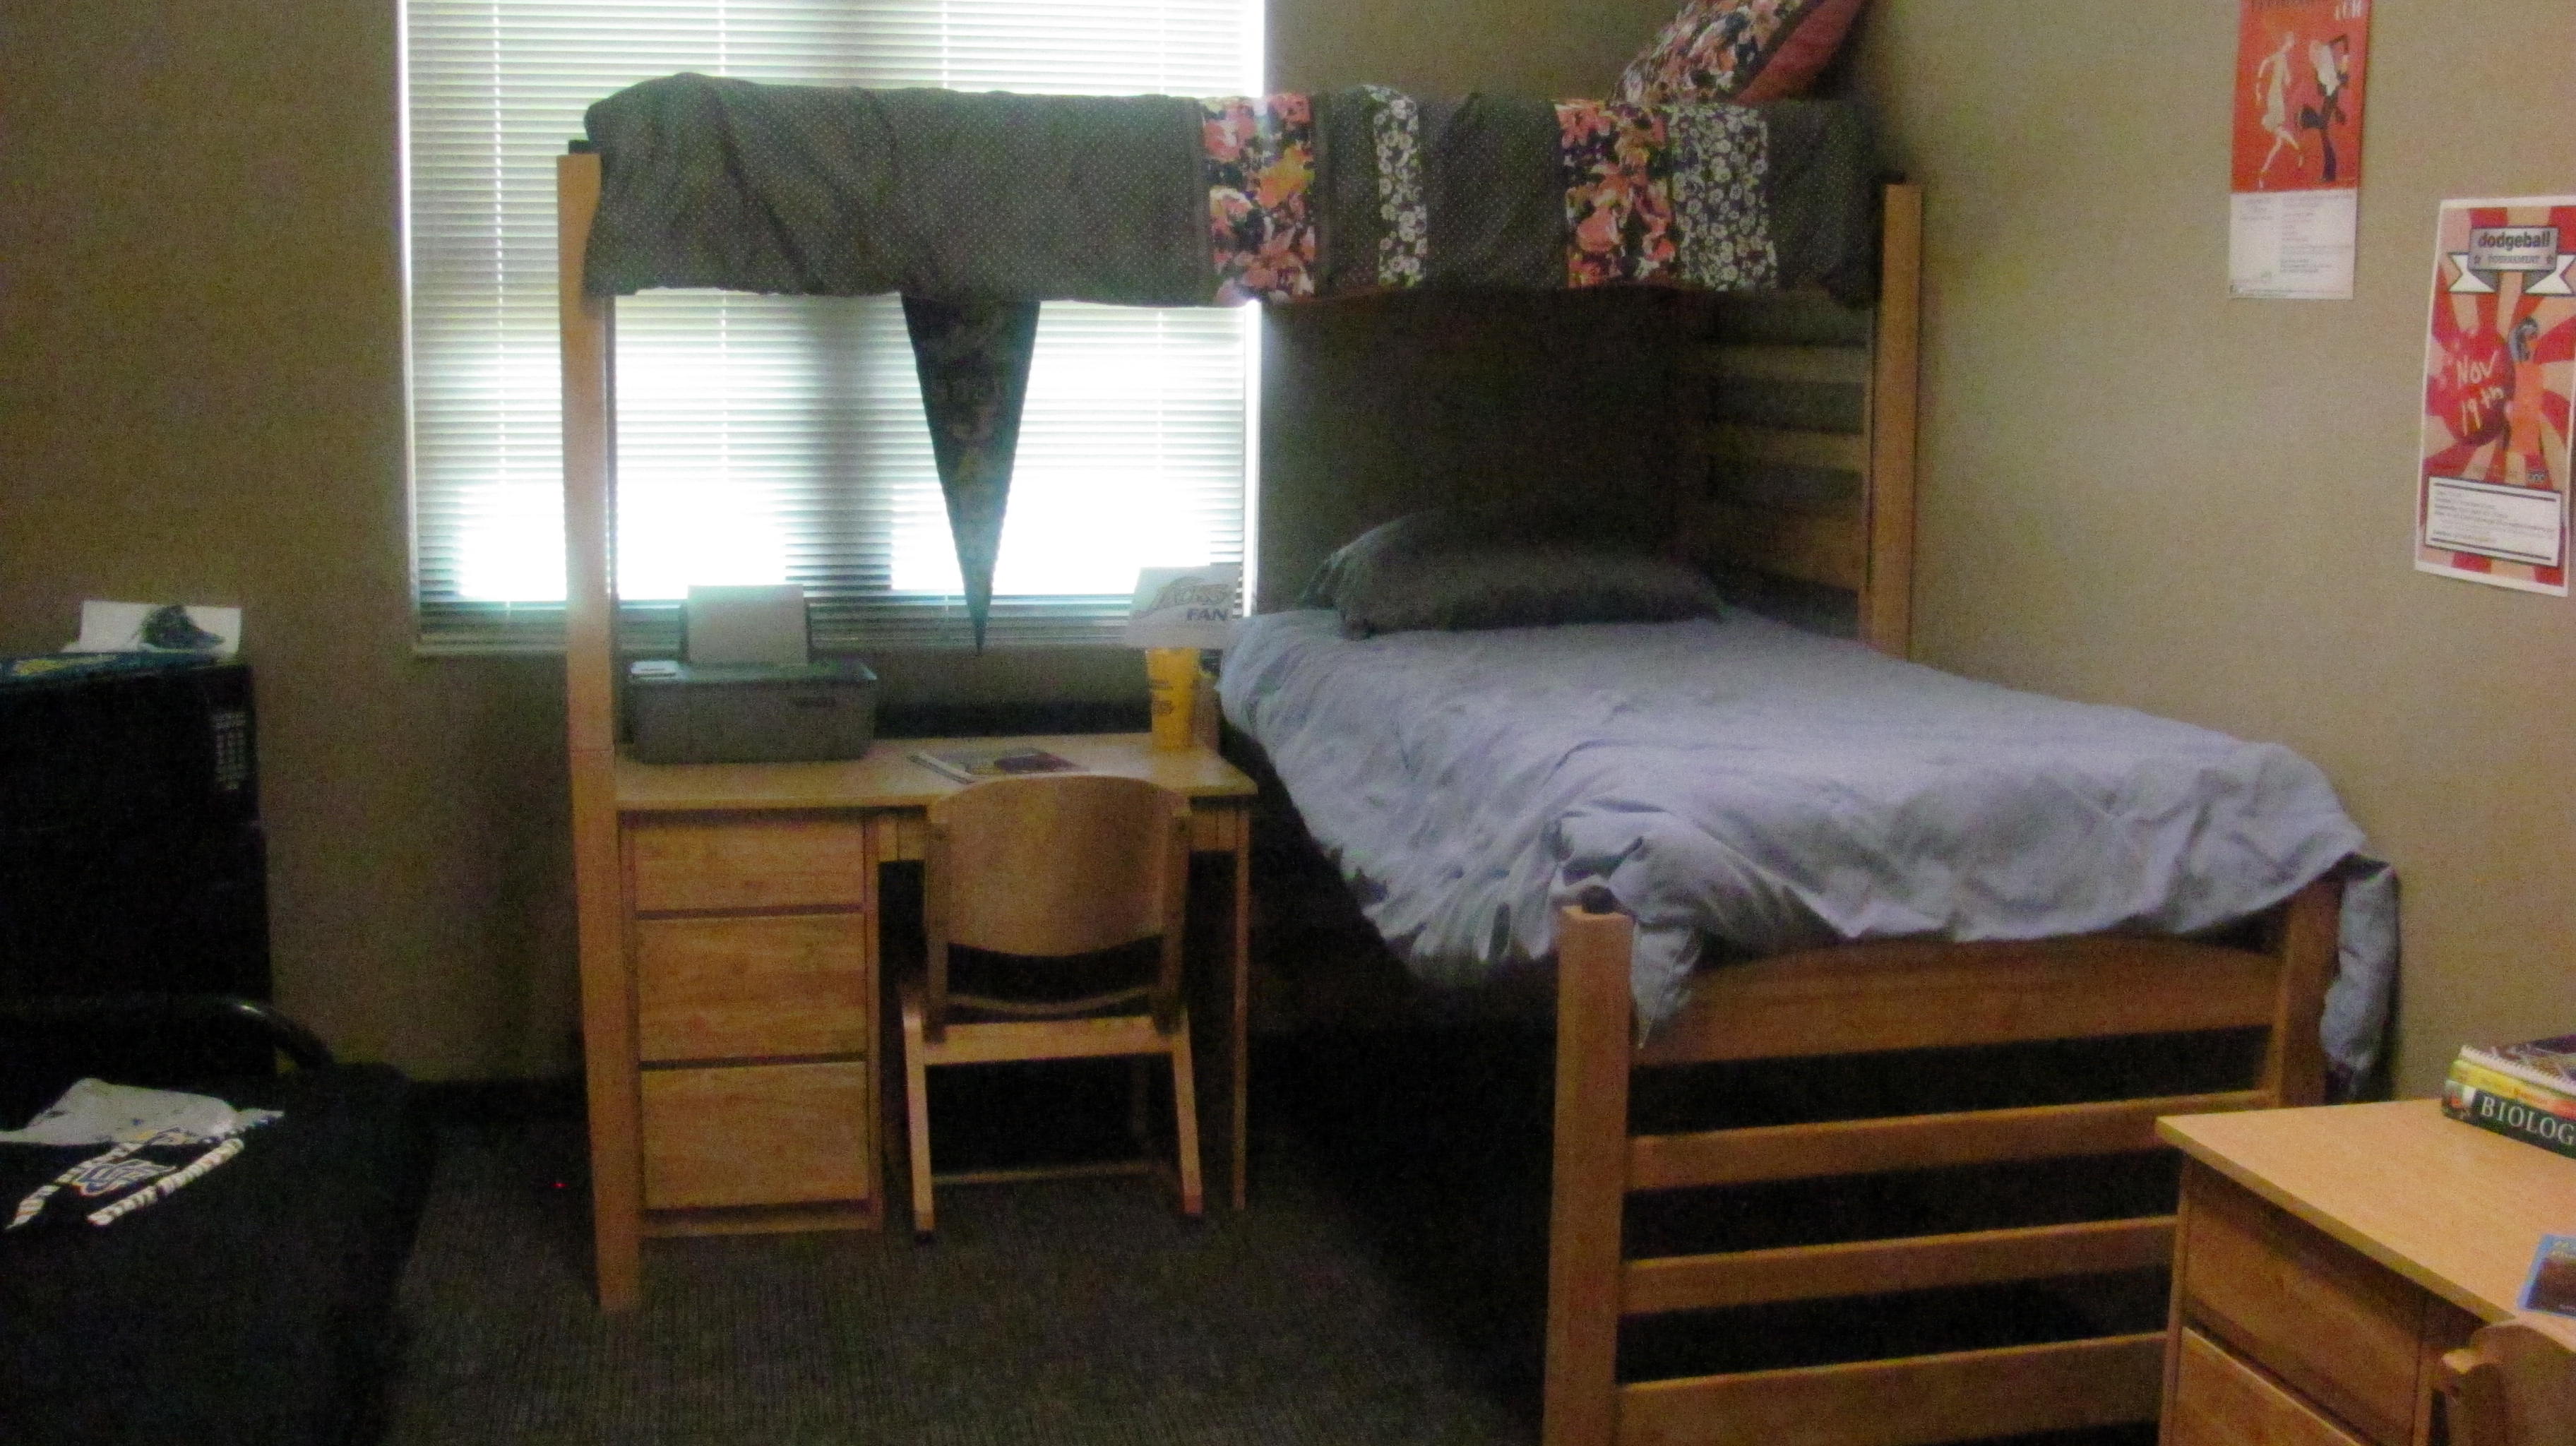 Room and Furniture Dimensions South Dakota State University